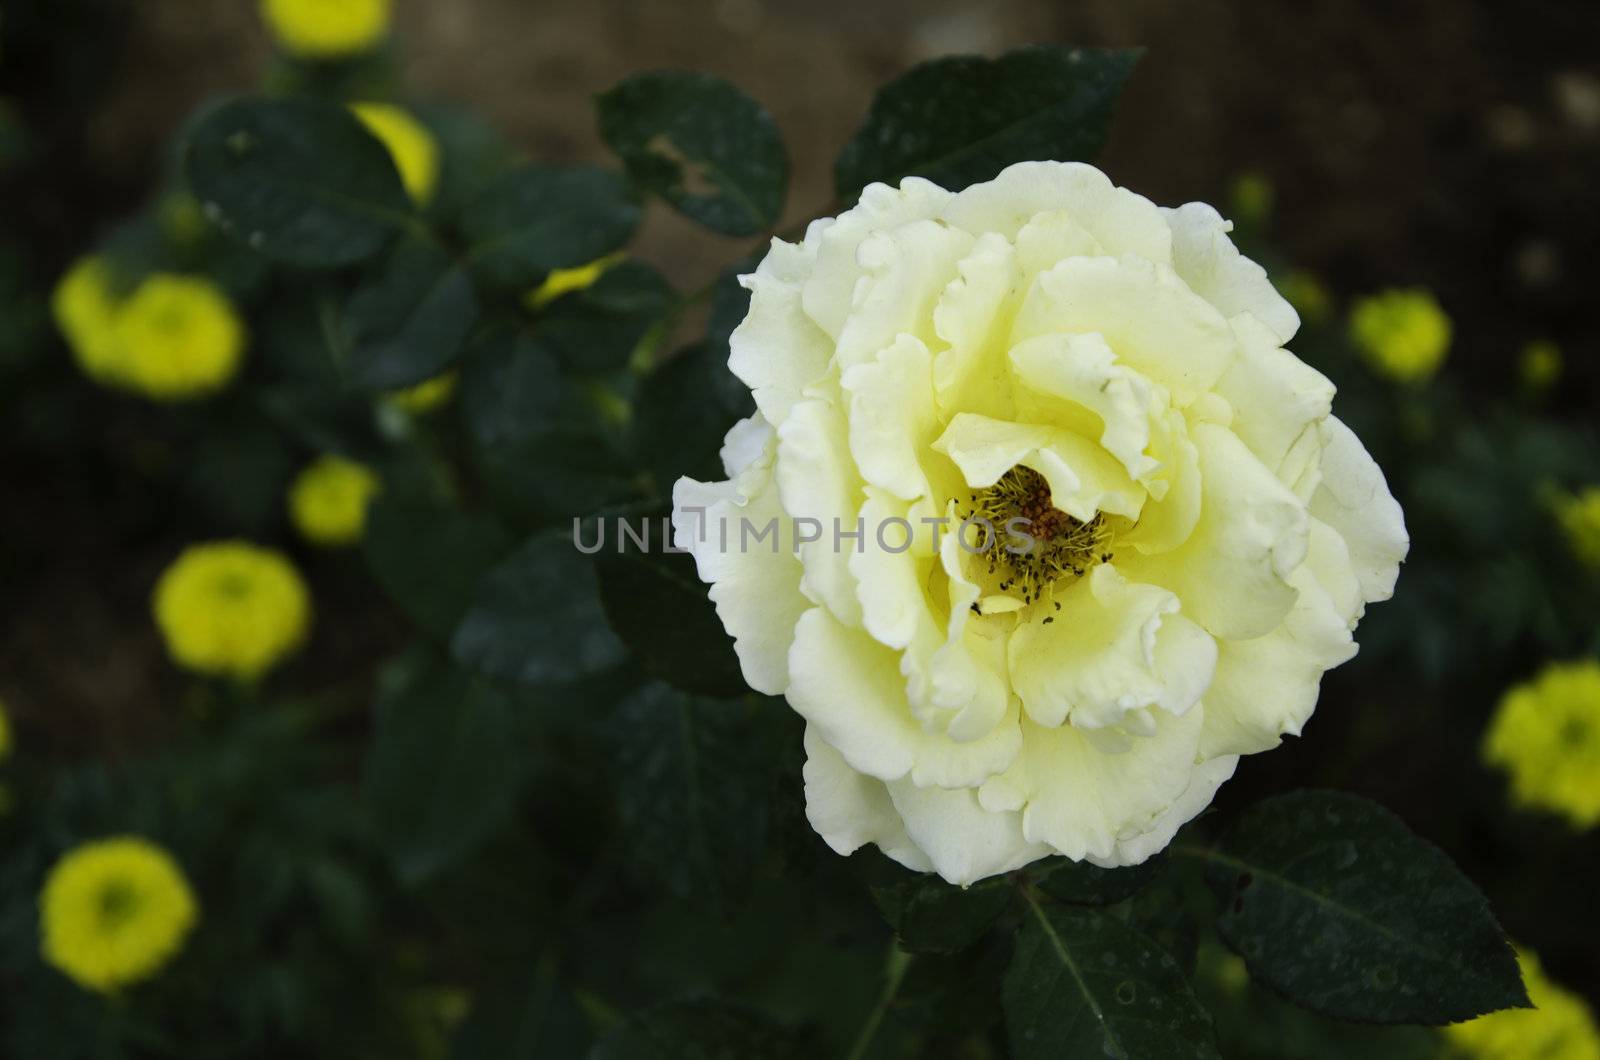 Close up of yellow rose flower blossom in flower garden